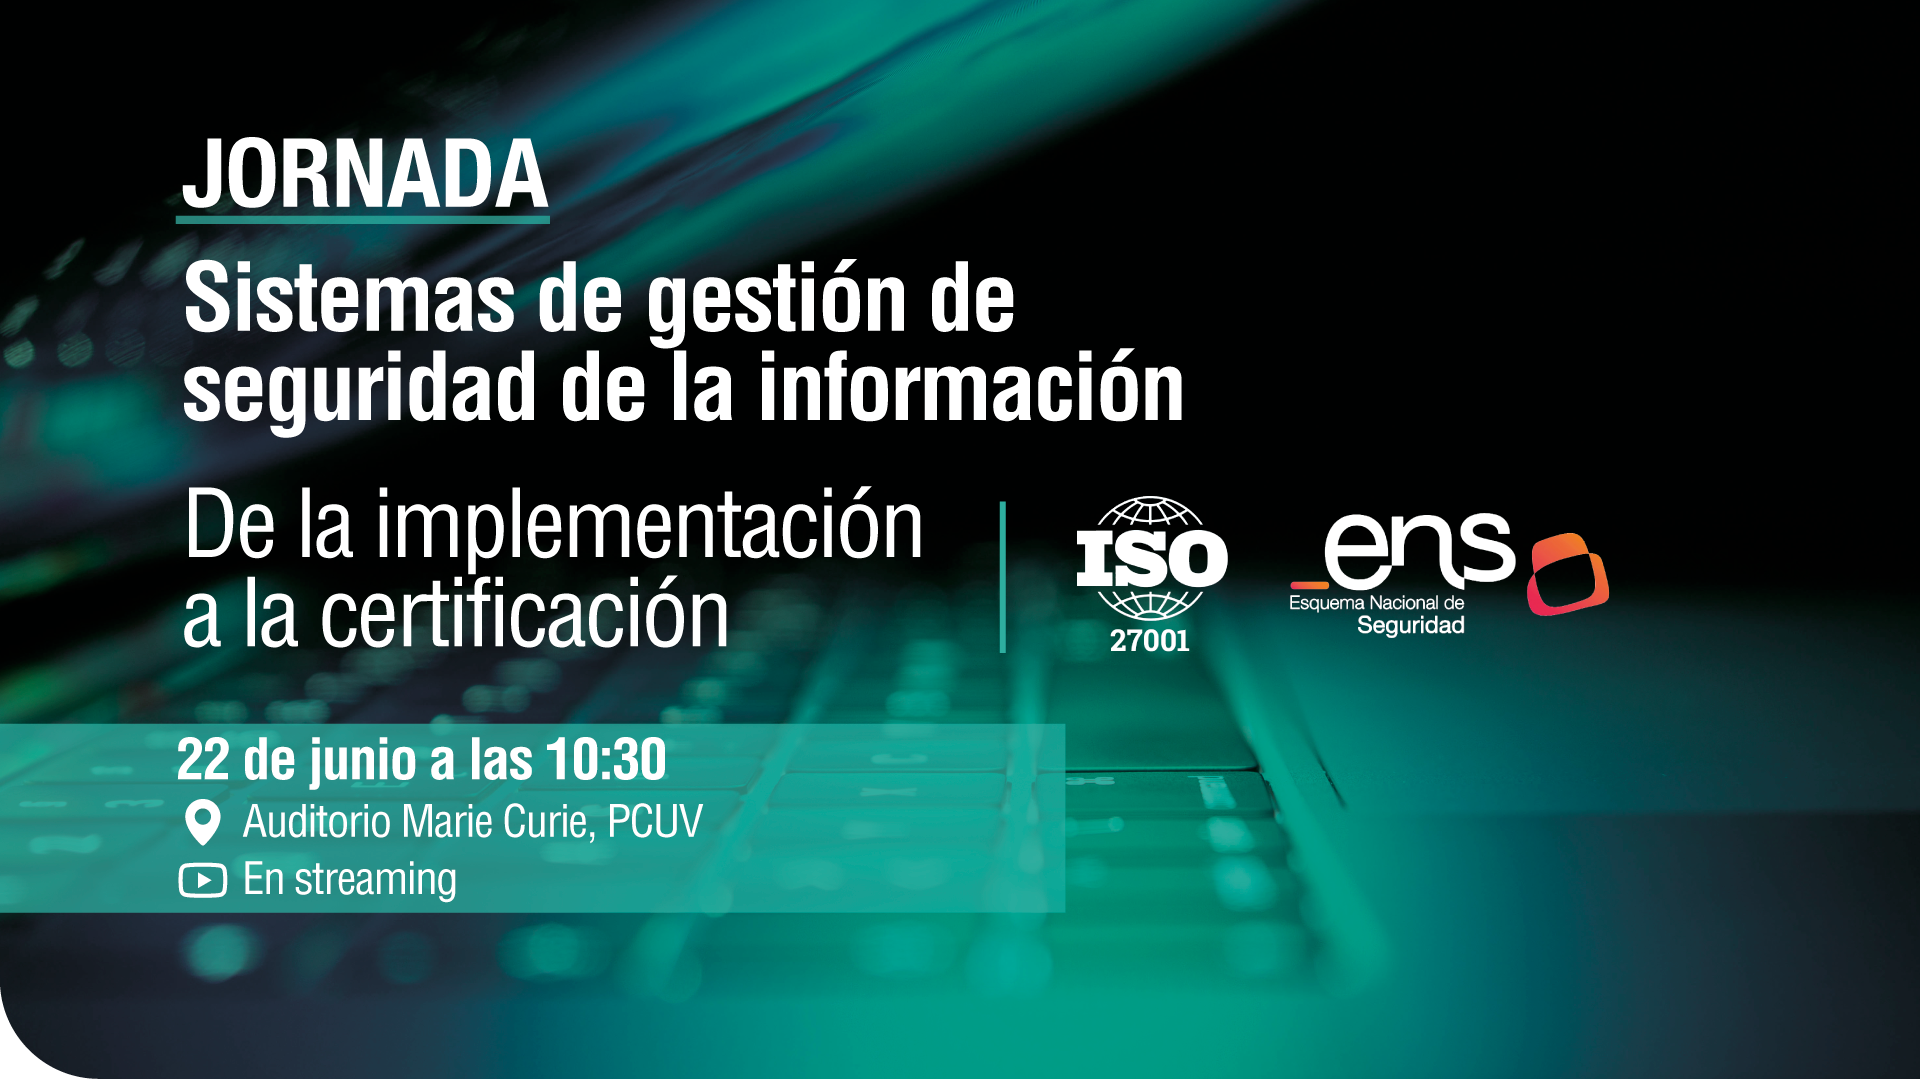 Information security management systems. ISO 27001 and ENS